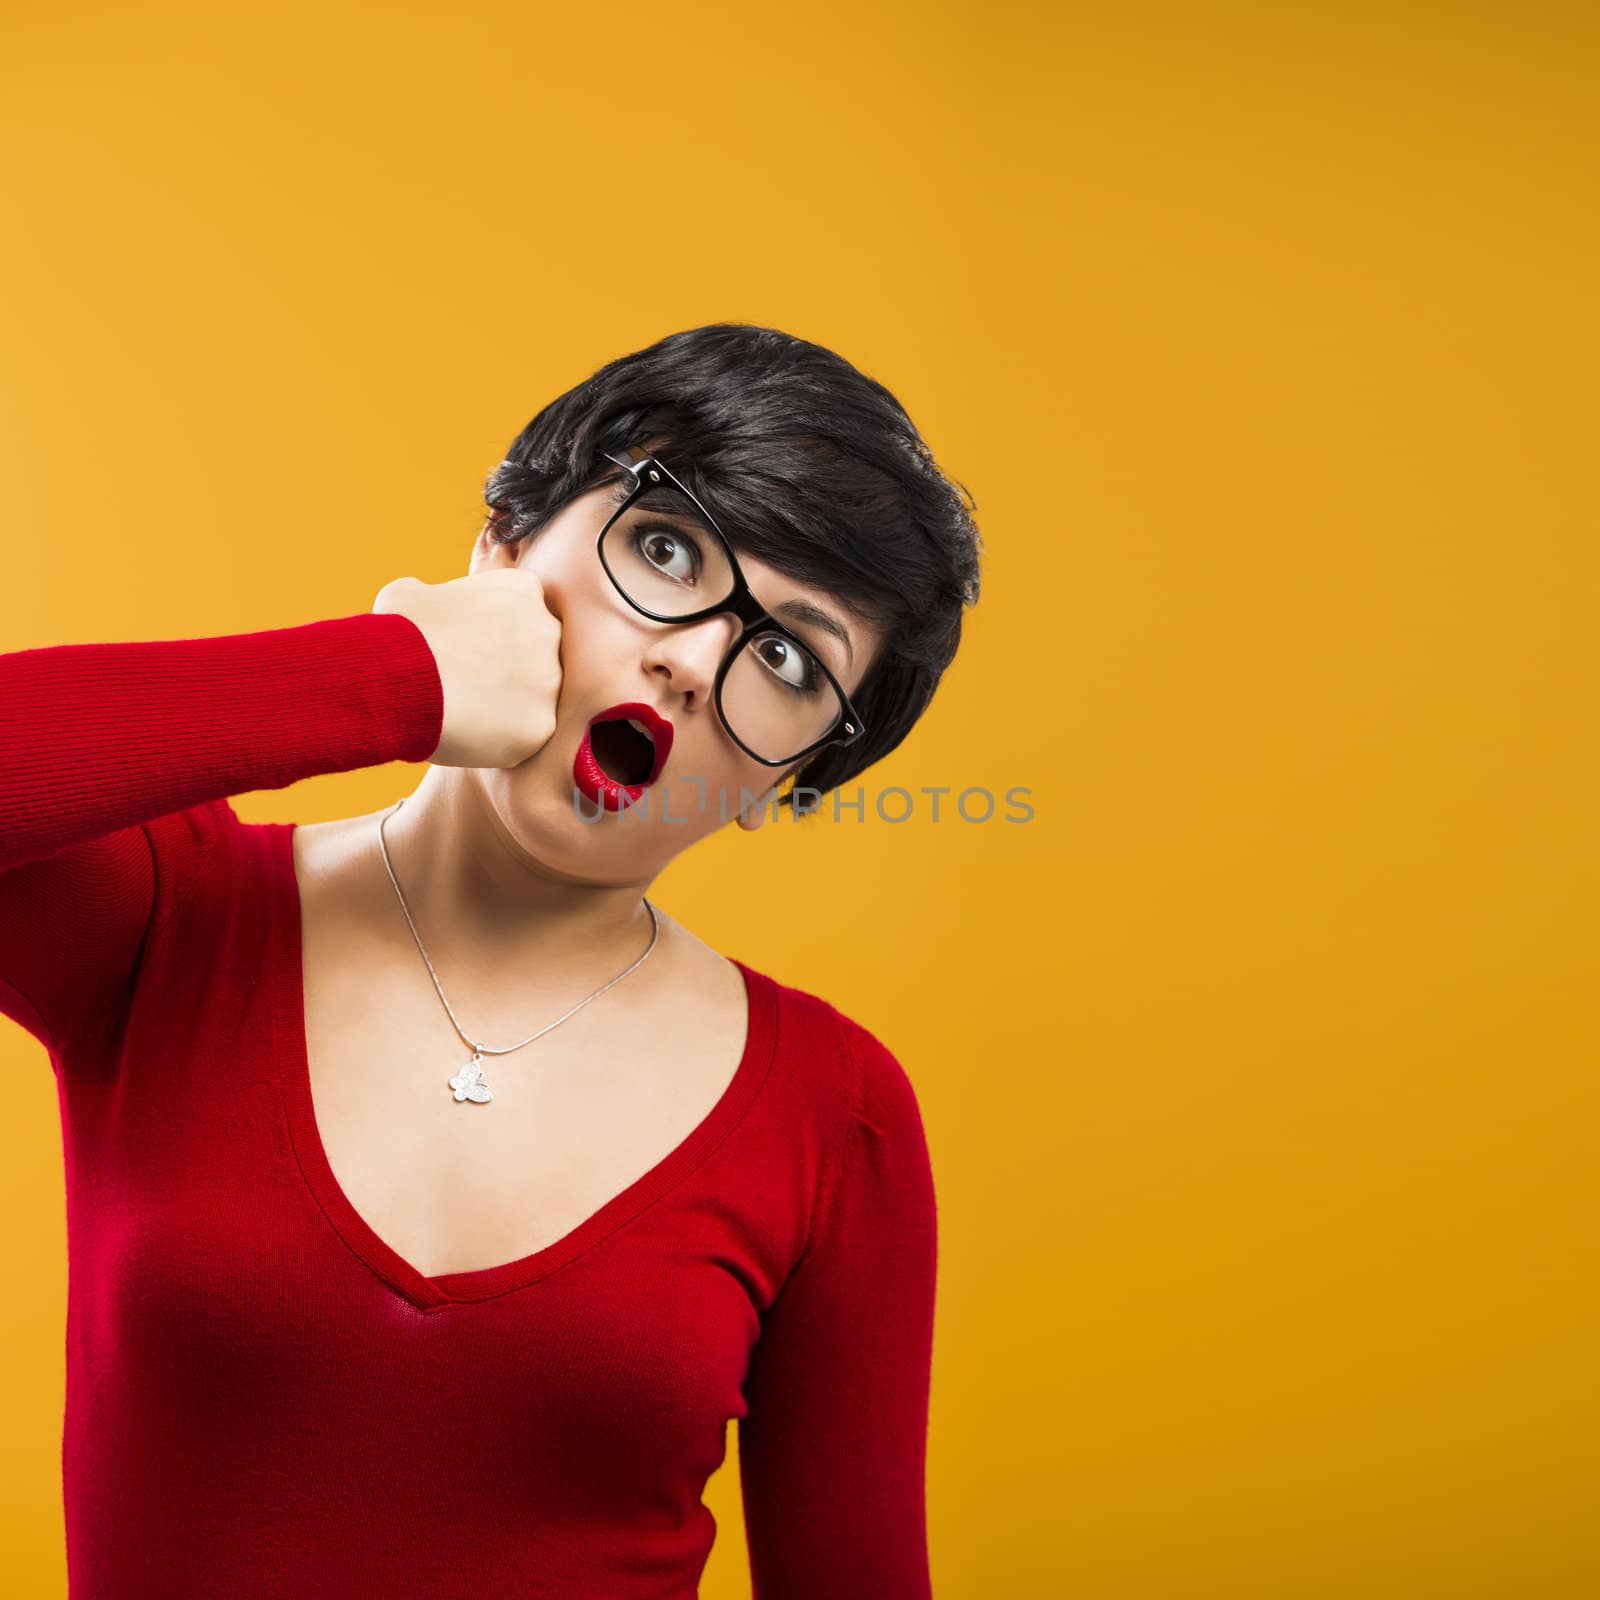 Nerd girl punching himself, against a yellow background